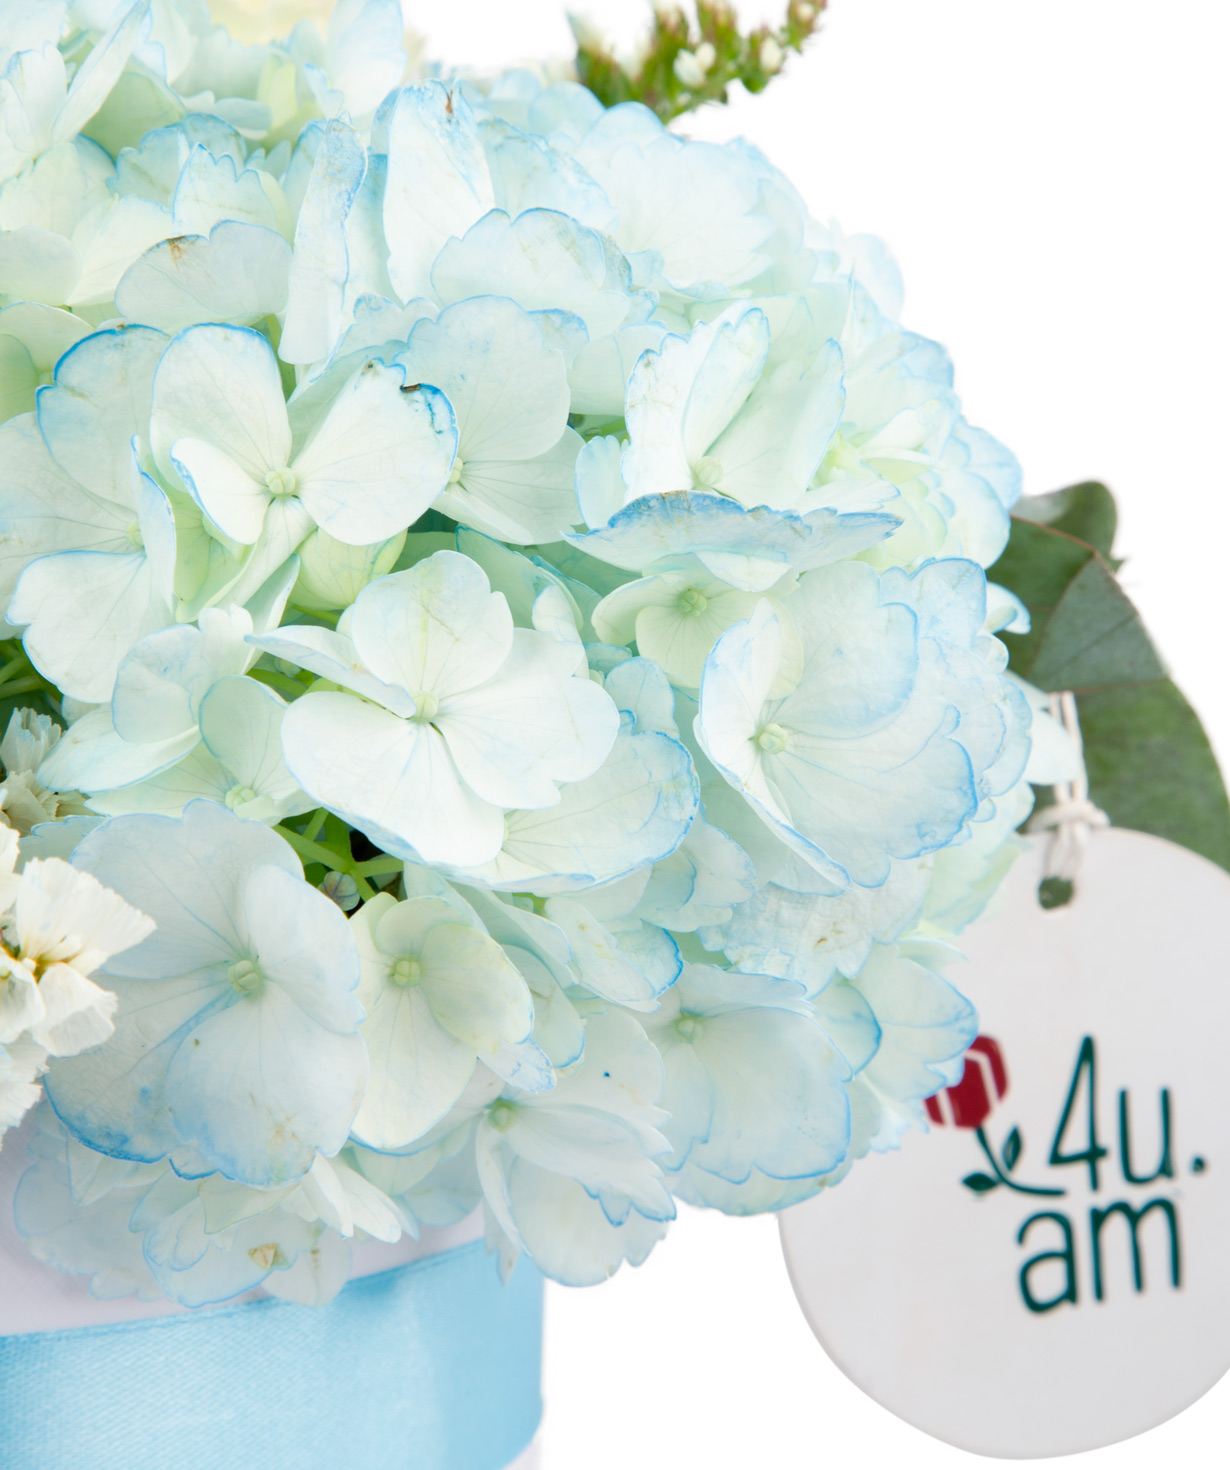 Composition `Apencel` with hydrangea, rose, lisianthus and limonium